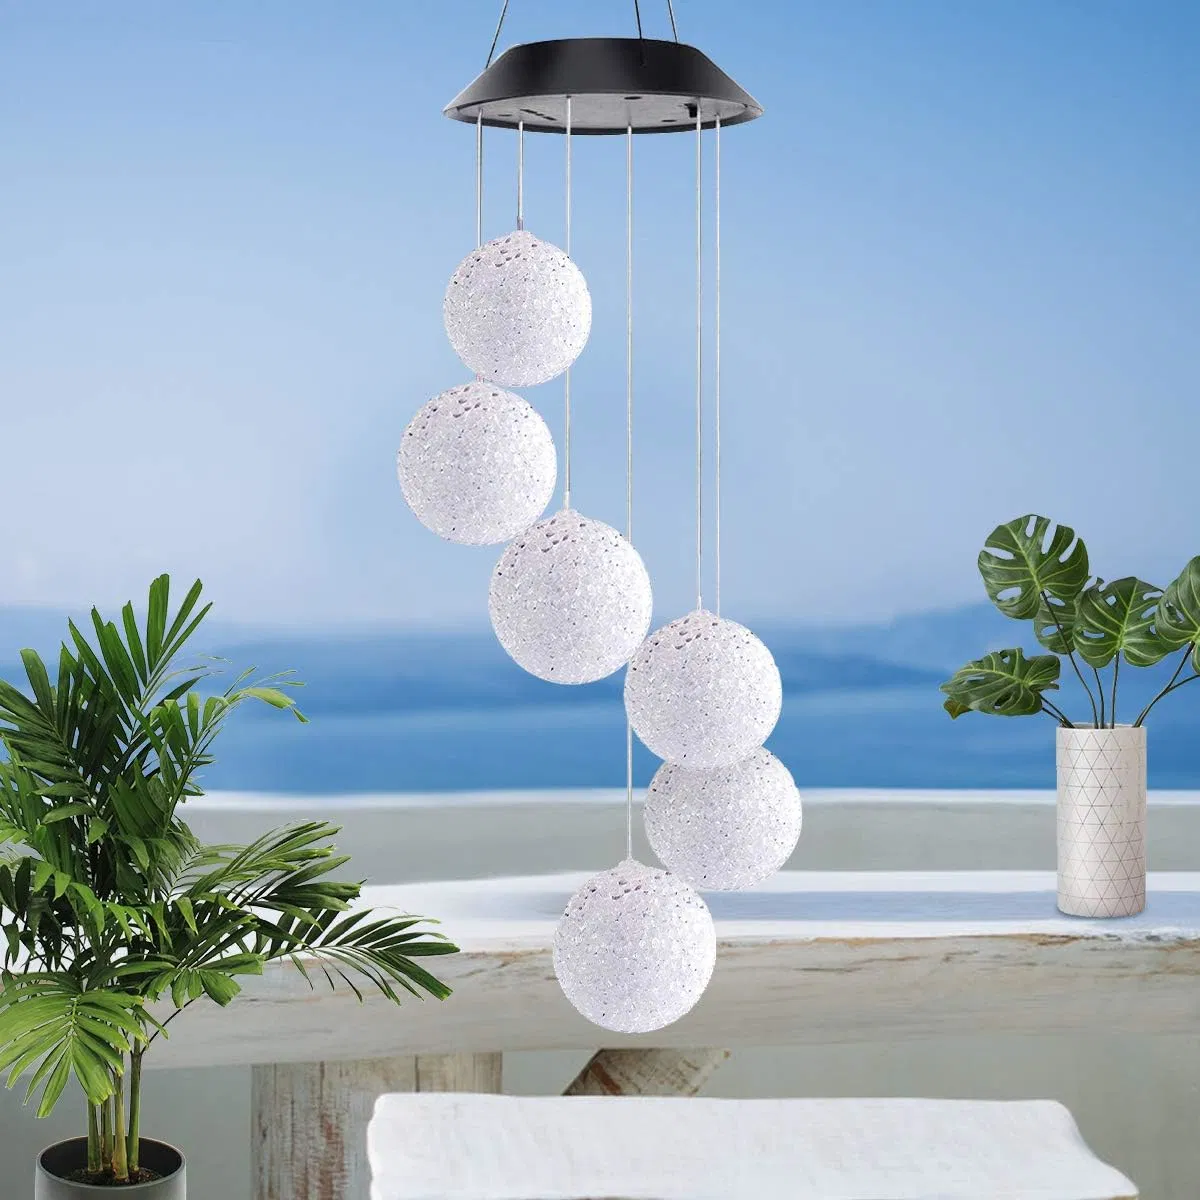 Alitamei Color Changing Crystal Ball LED Light Solar Powered Wind Chime Waterproof Hanging Solar Mobile Lamp for Patio Yard Garden Home Decoration Gift,